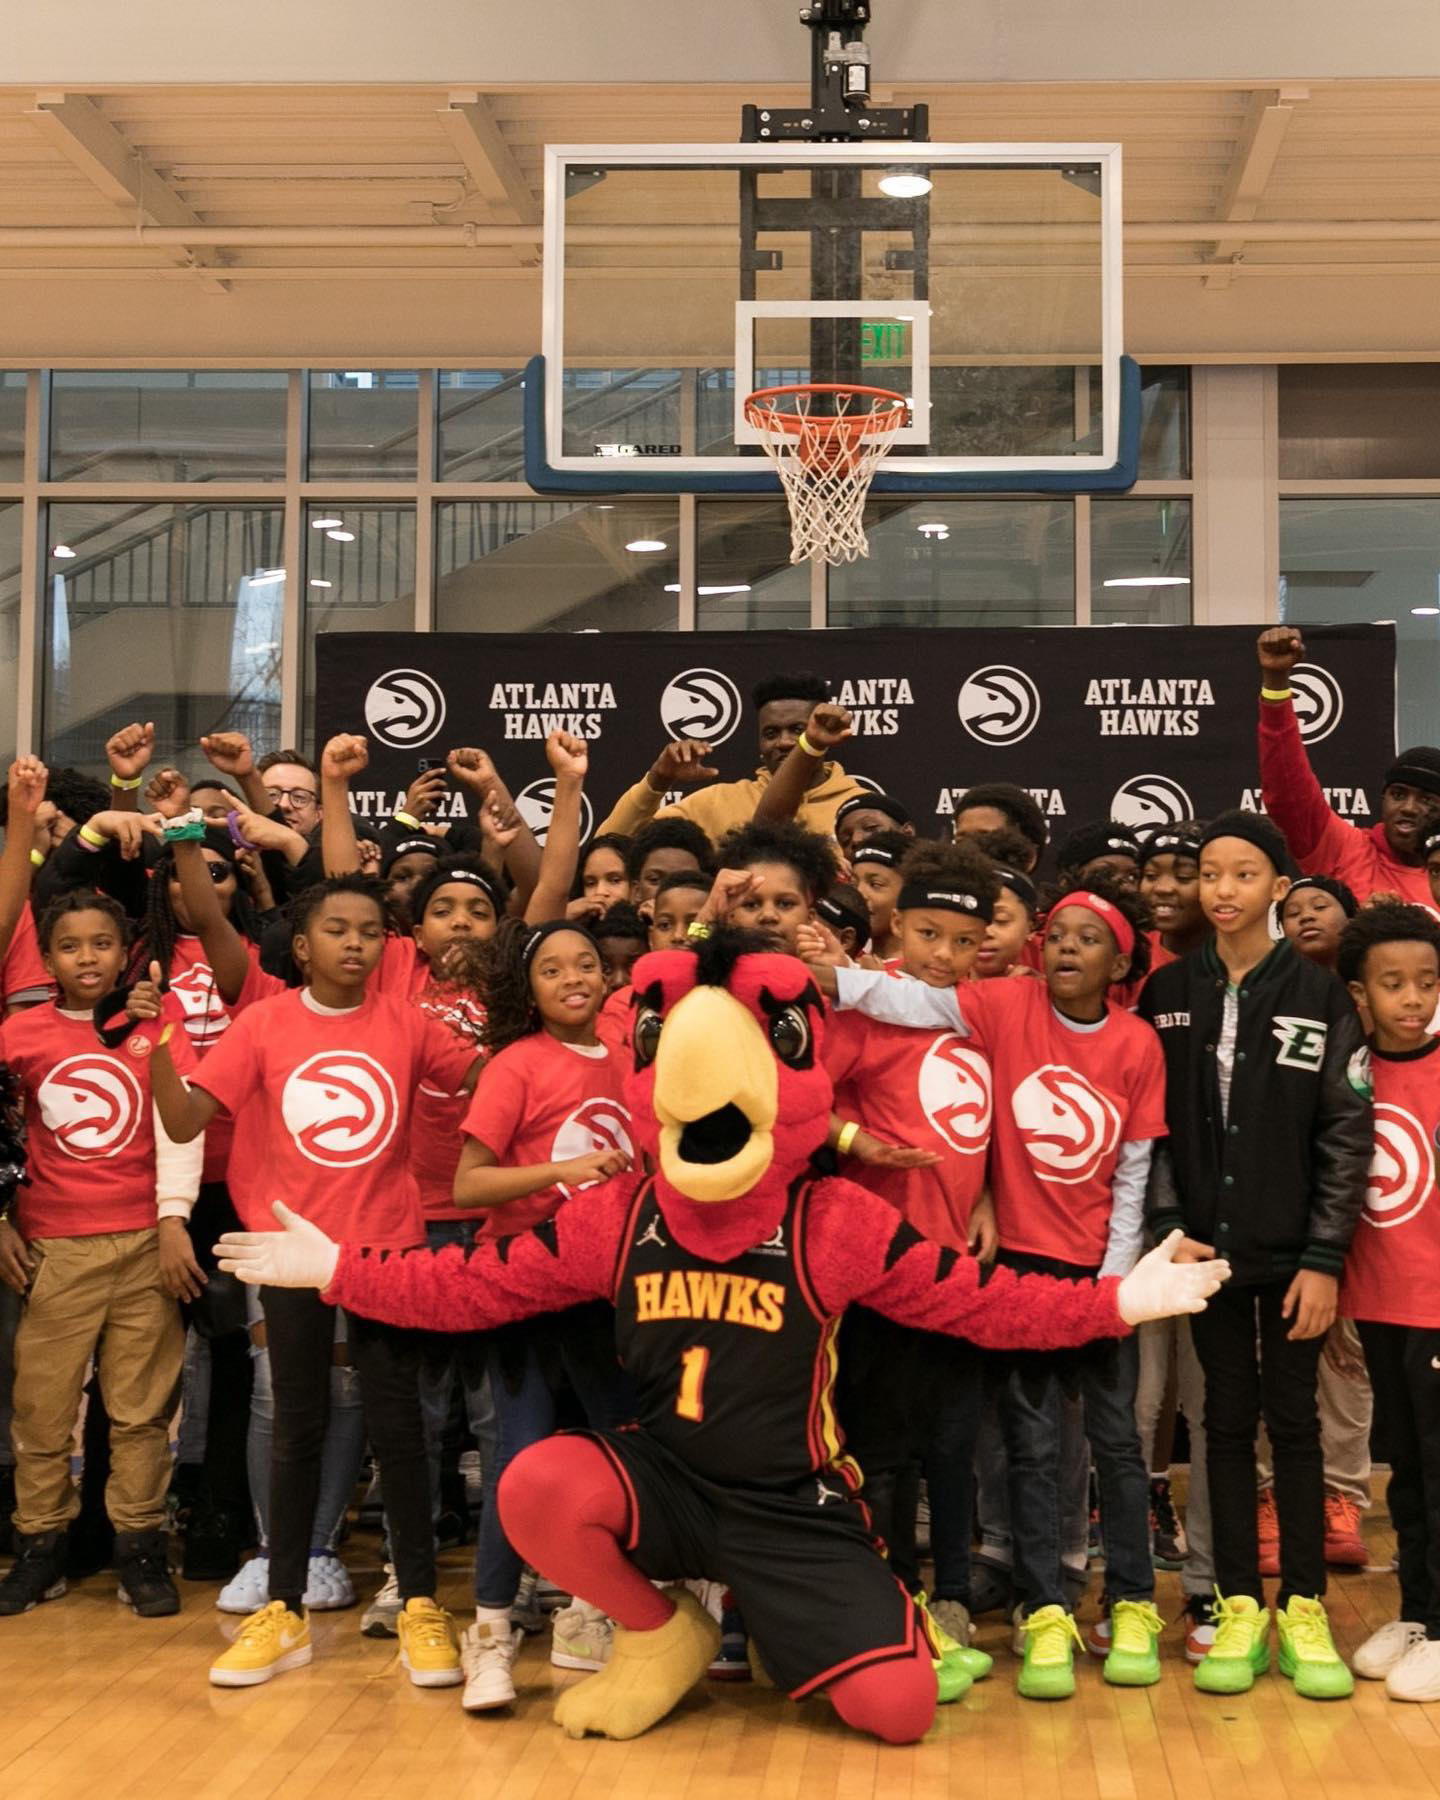 image  1 We partnered with the #atlhawks to teach kids how to create code to make Harry the Hawk dunk